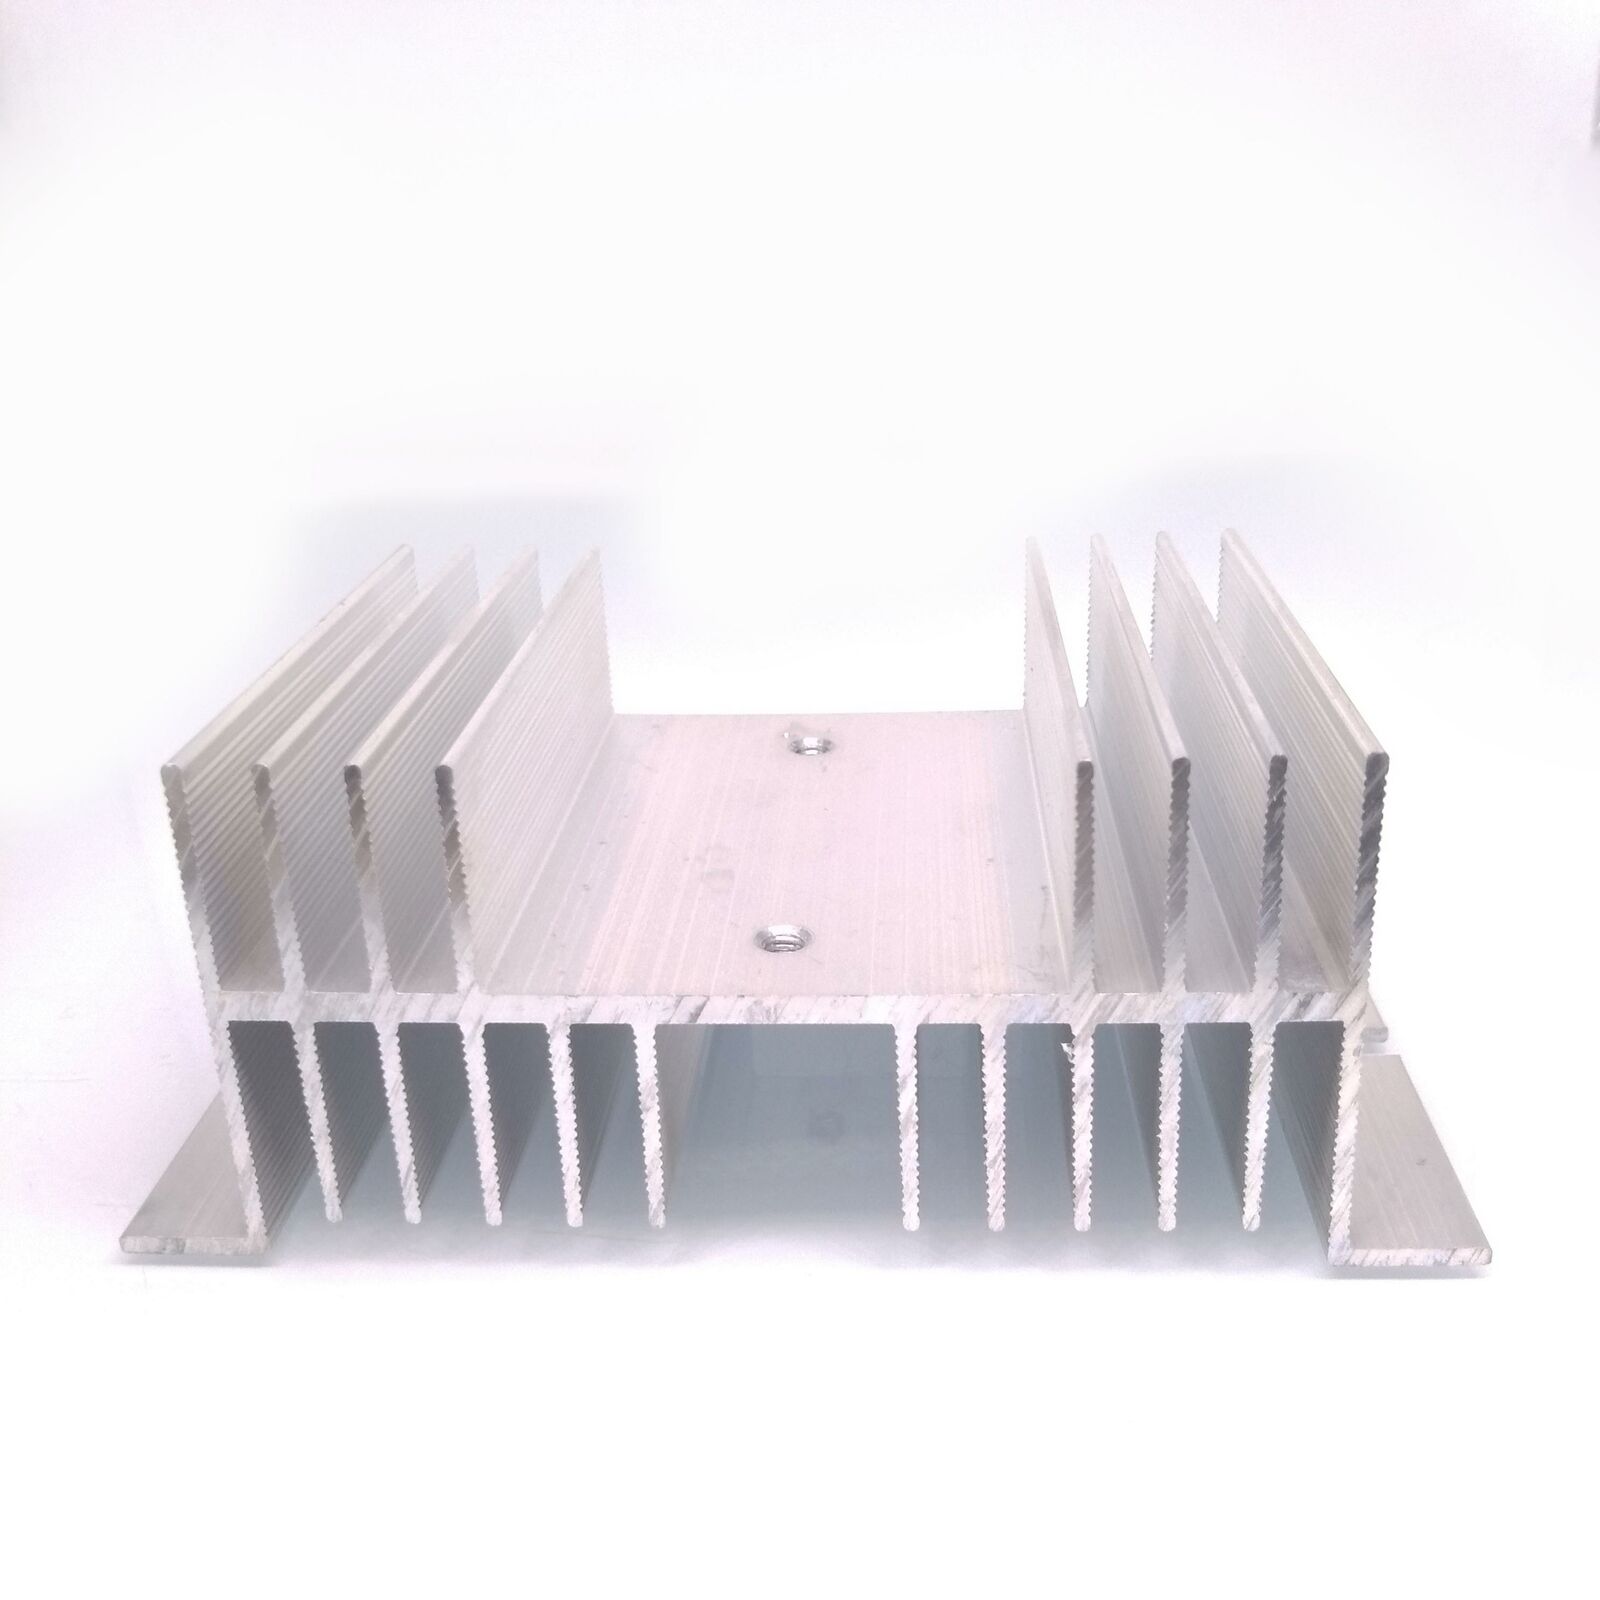 US Stock Aluminum Heat Sink 125mm x 70mm x 50mm for Solid State Relay SSR